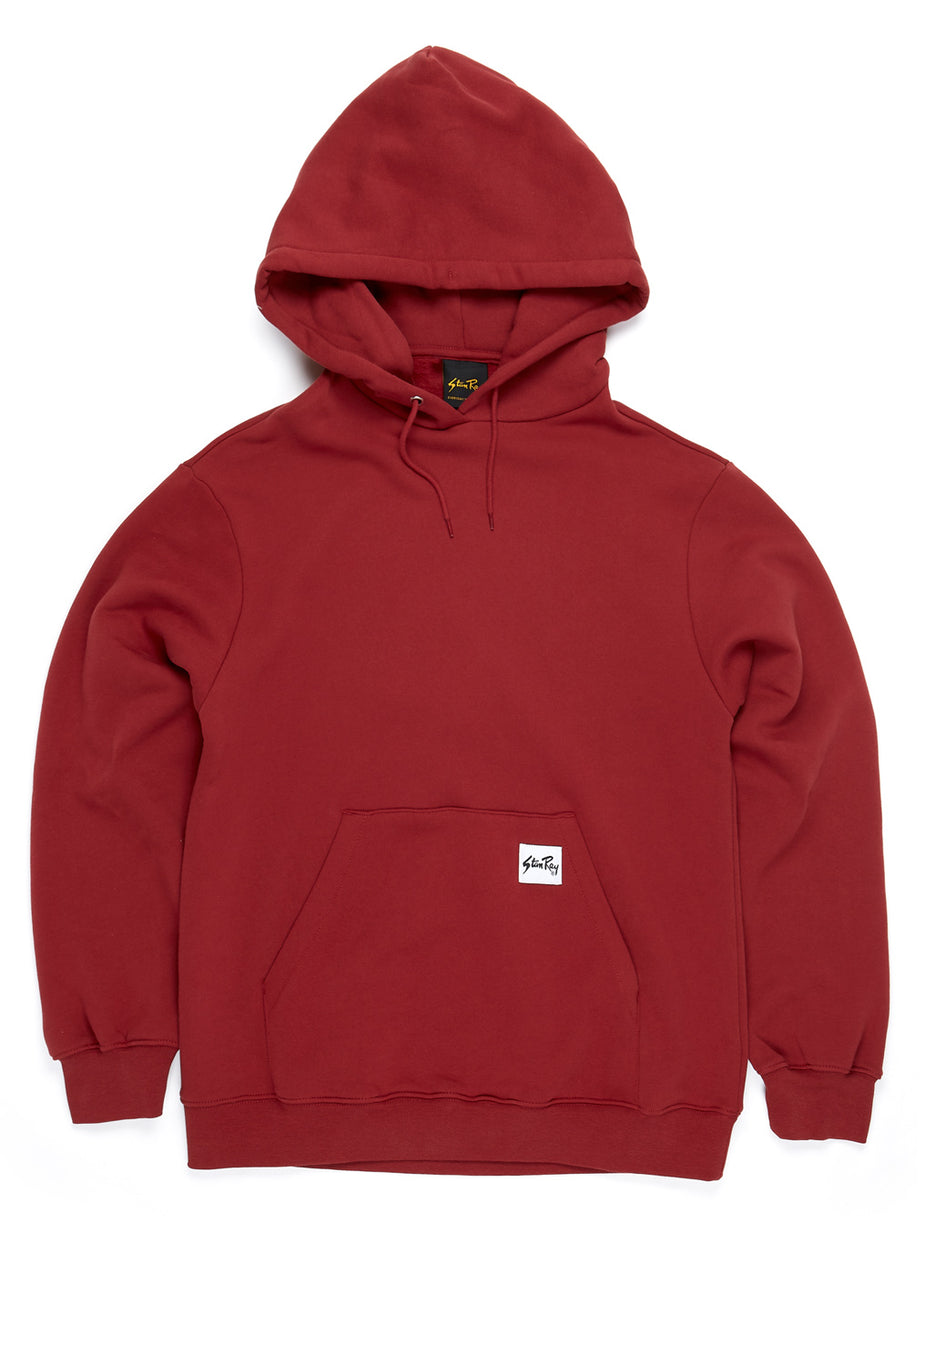 Stan Ray Men's Patch Hoody - Cranberry